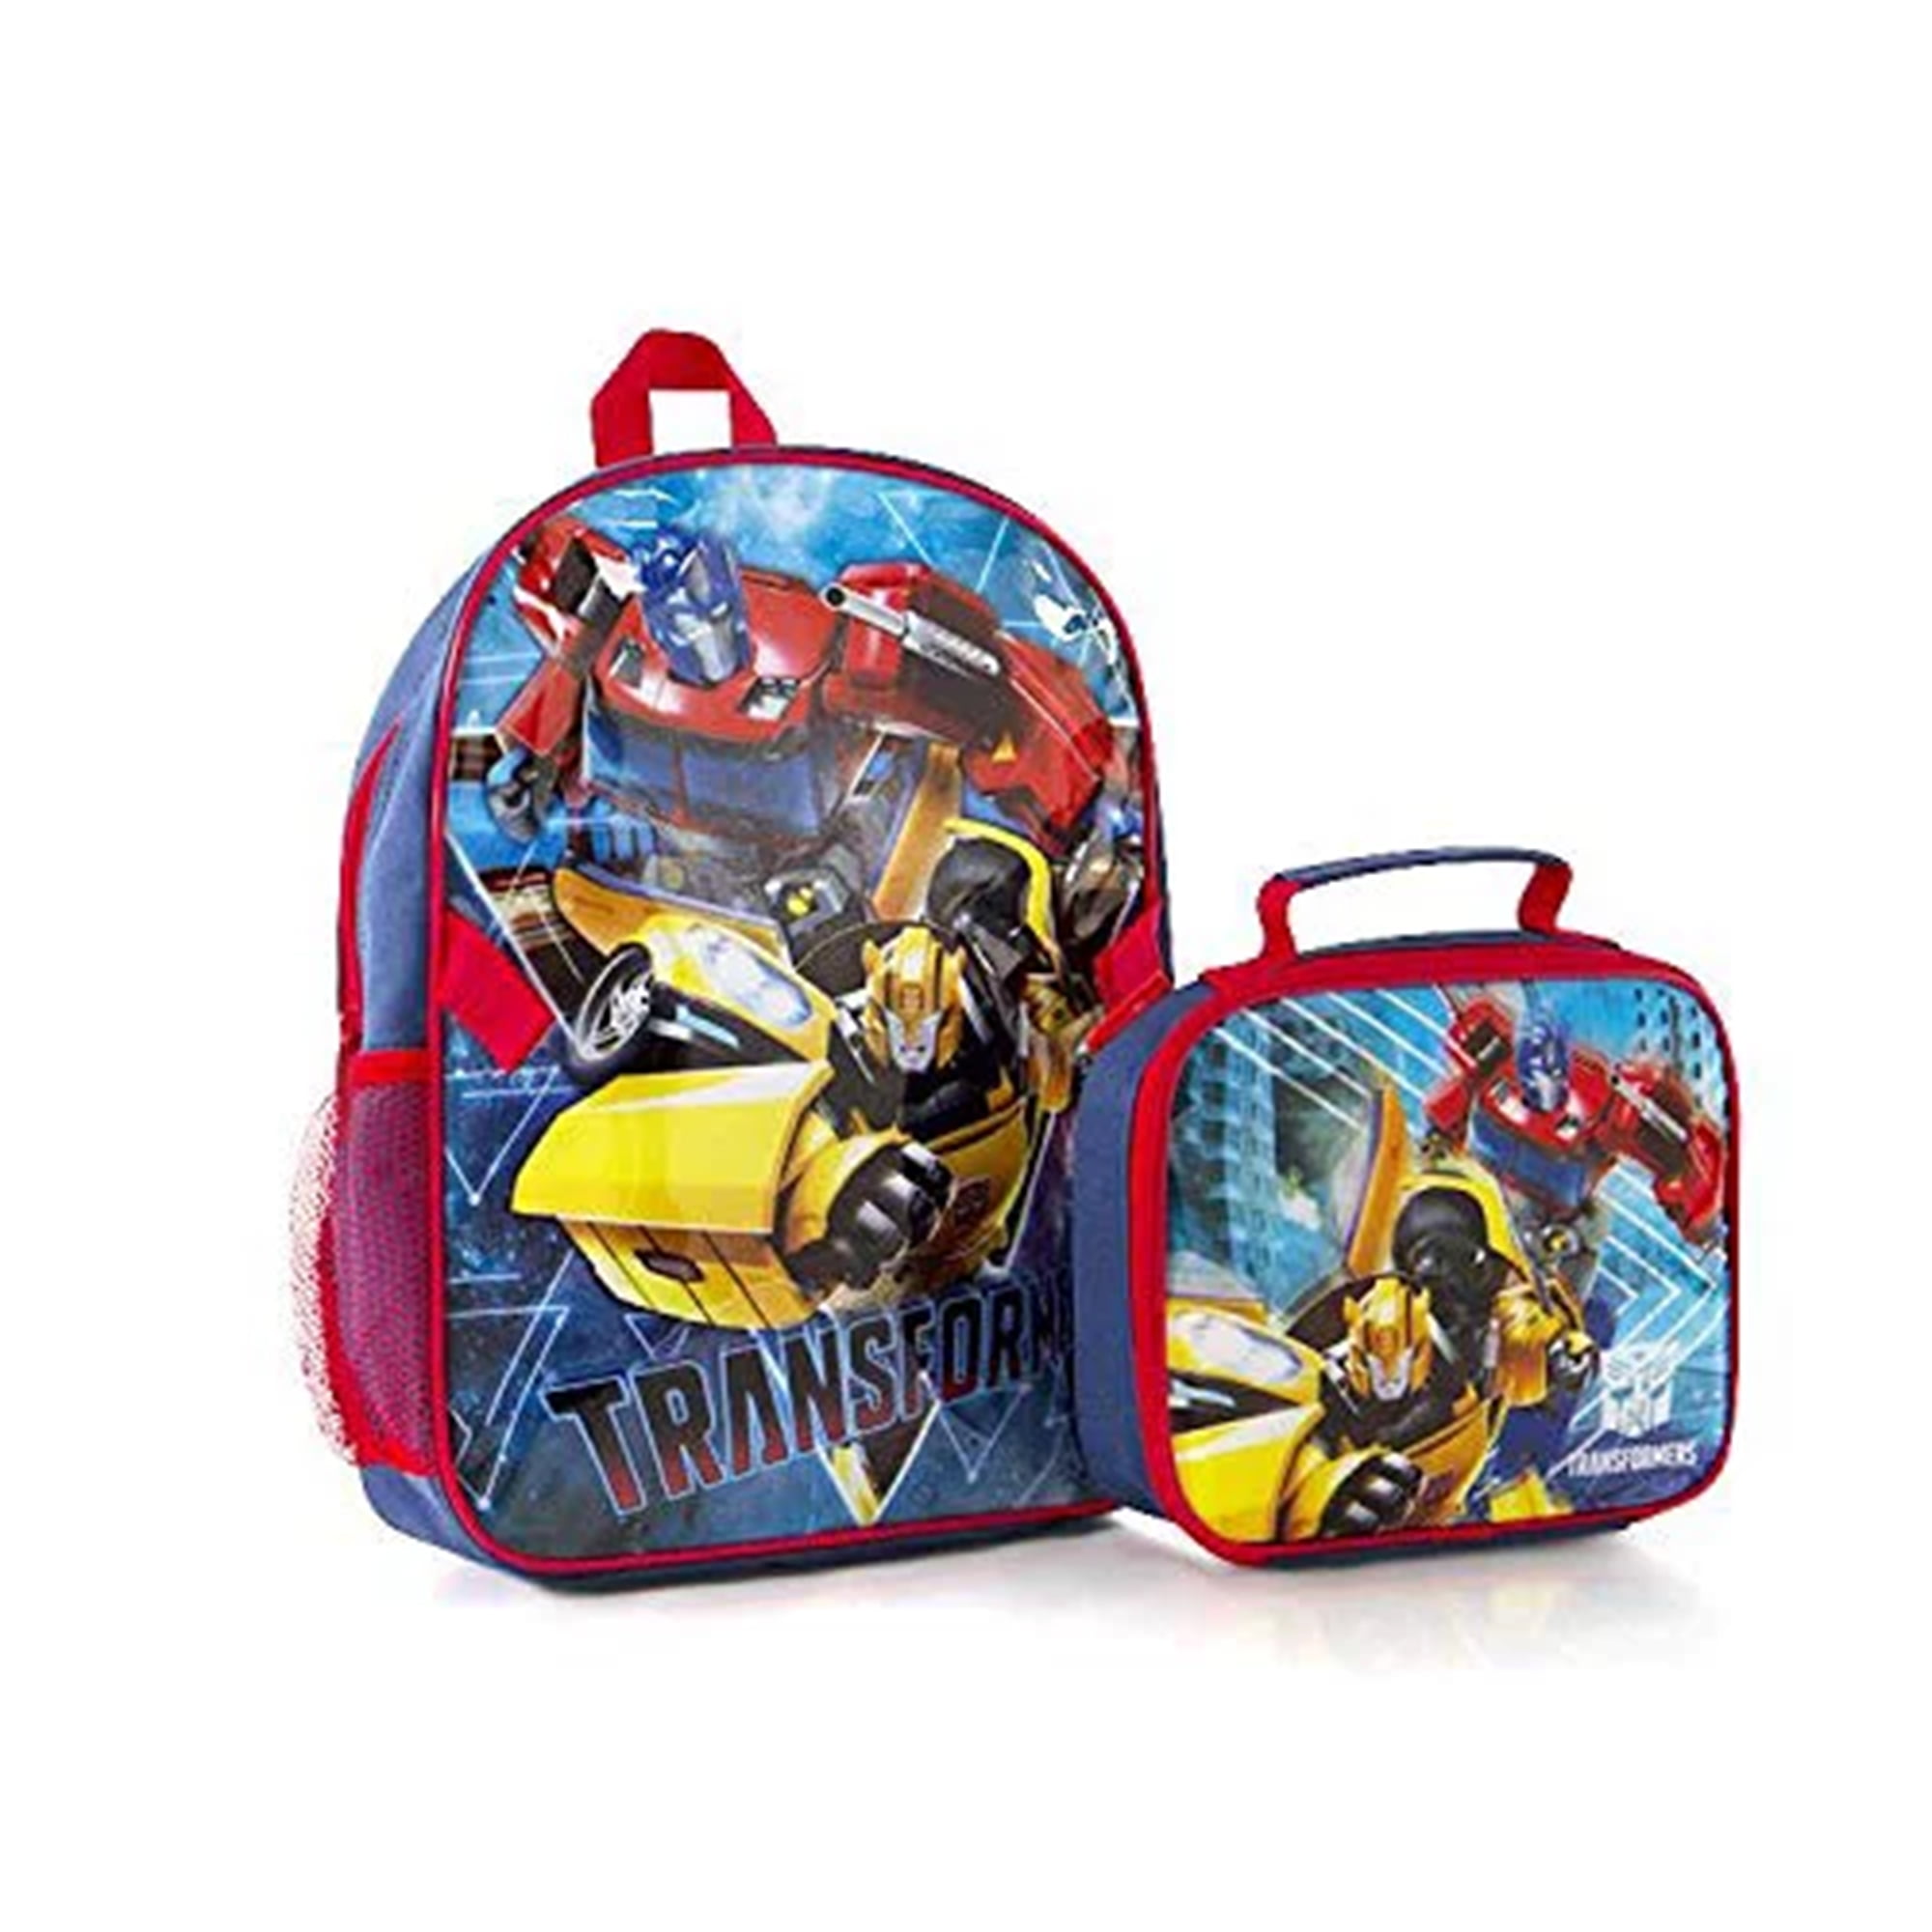  Screen Legends Transformers Backpack and Lunch Box Set for Boys  - Bundle with 15” Transformers Backpack, Lunch Bag, Tattoos, Water Bottle,  More